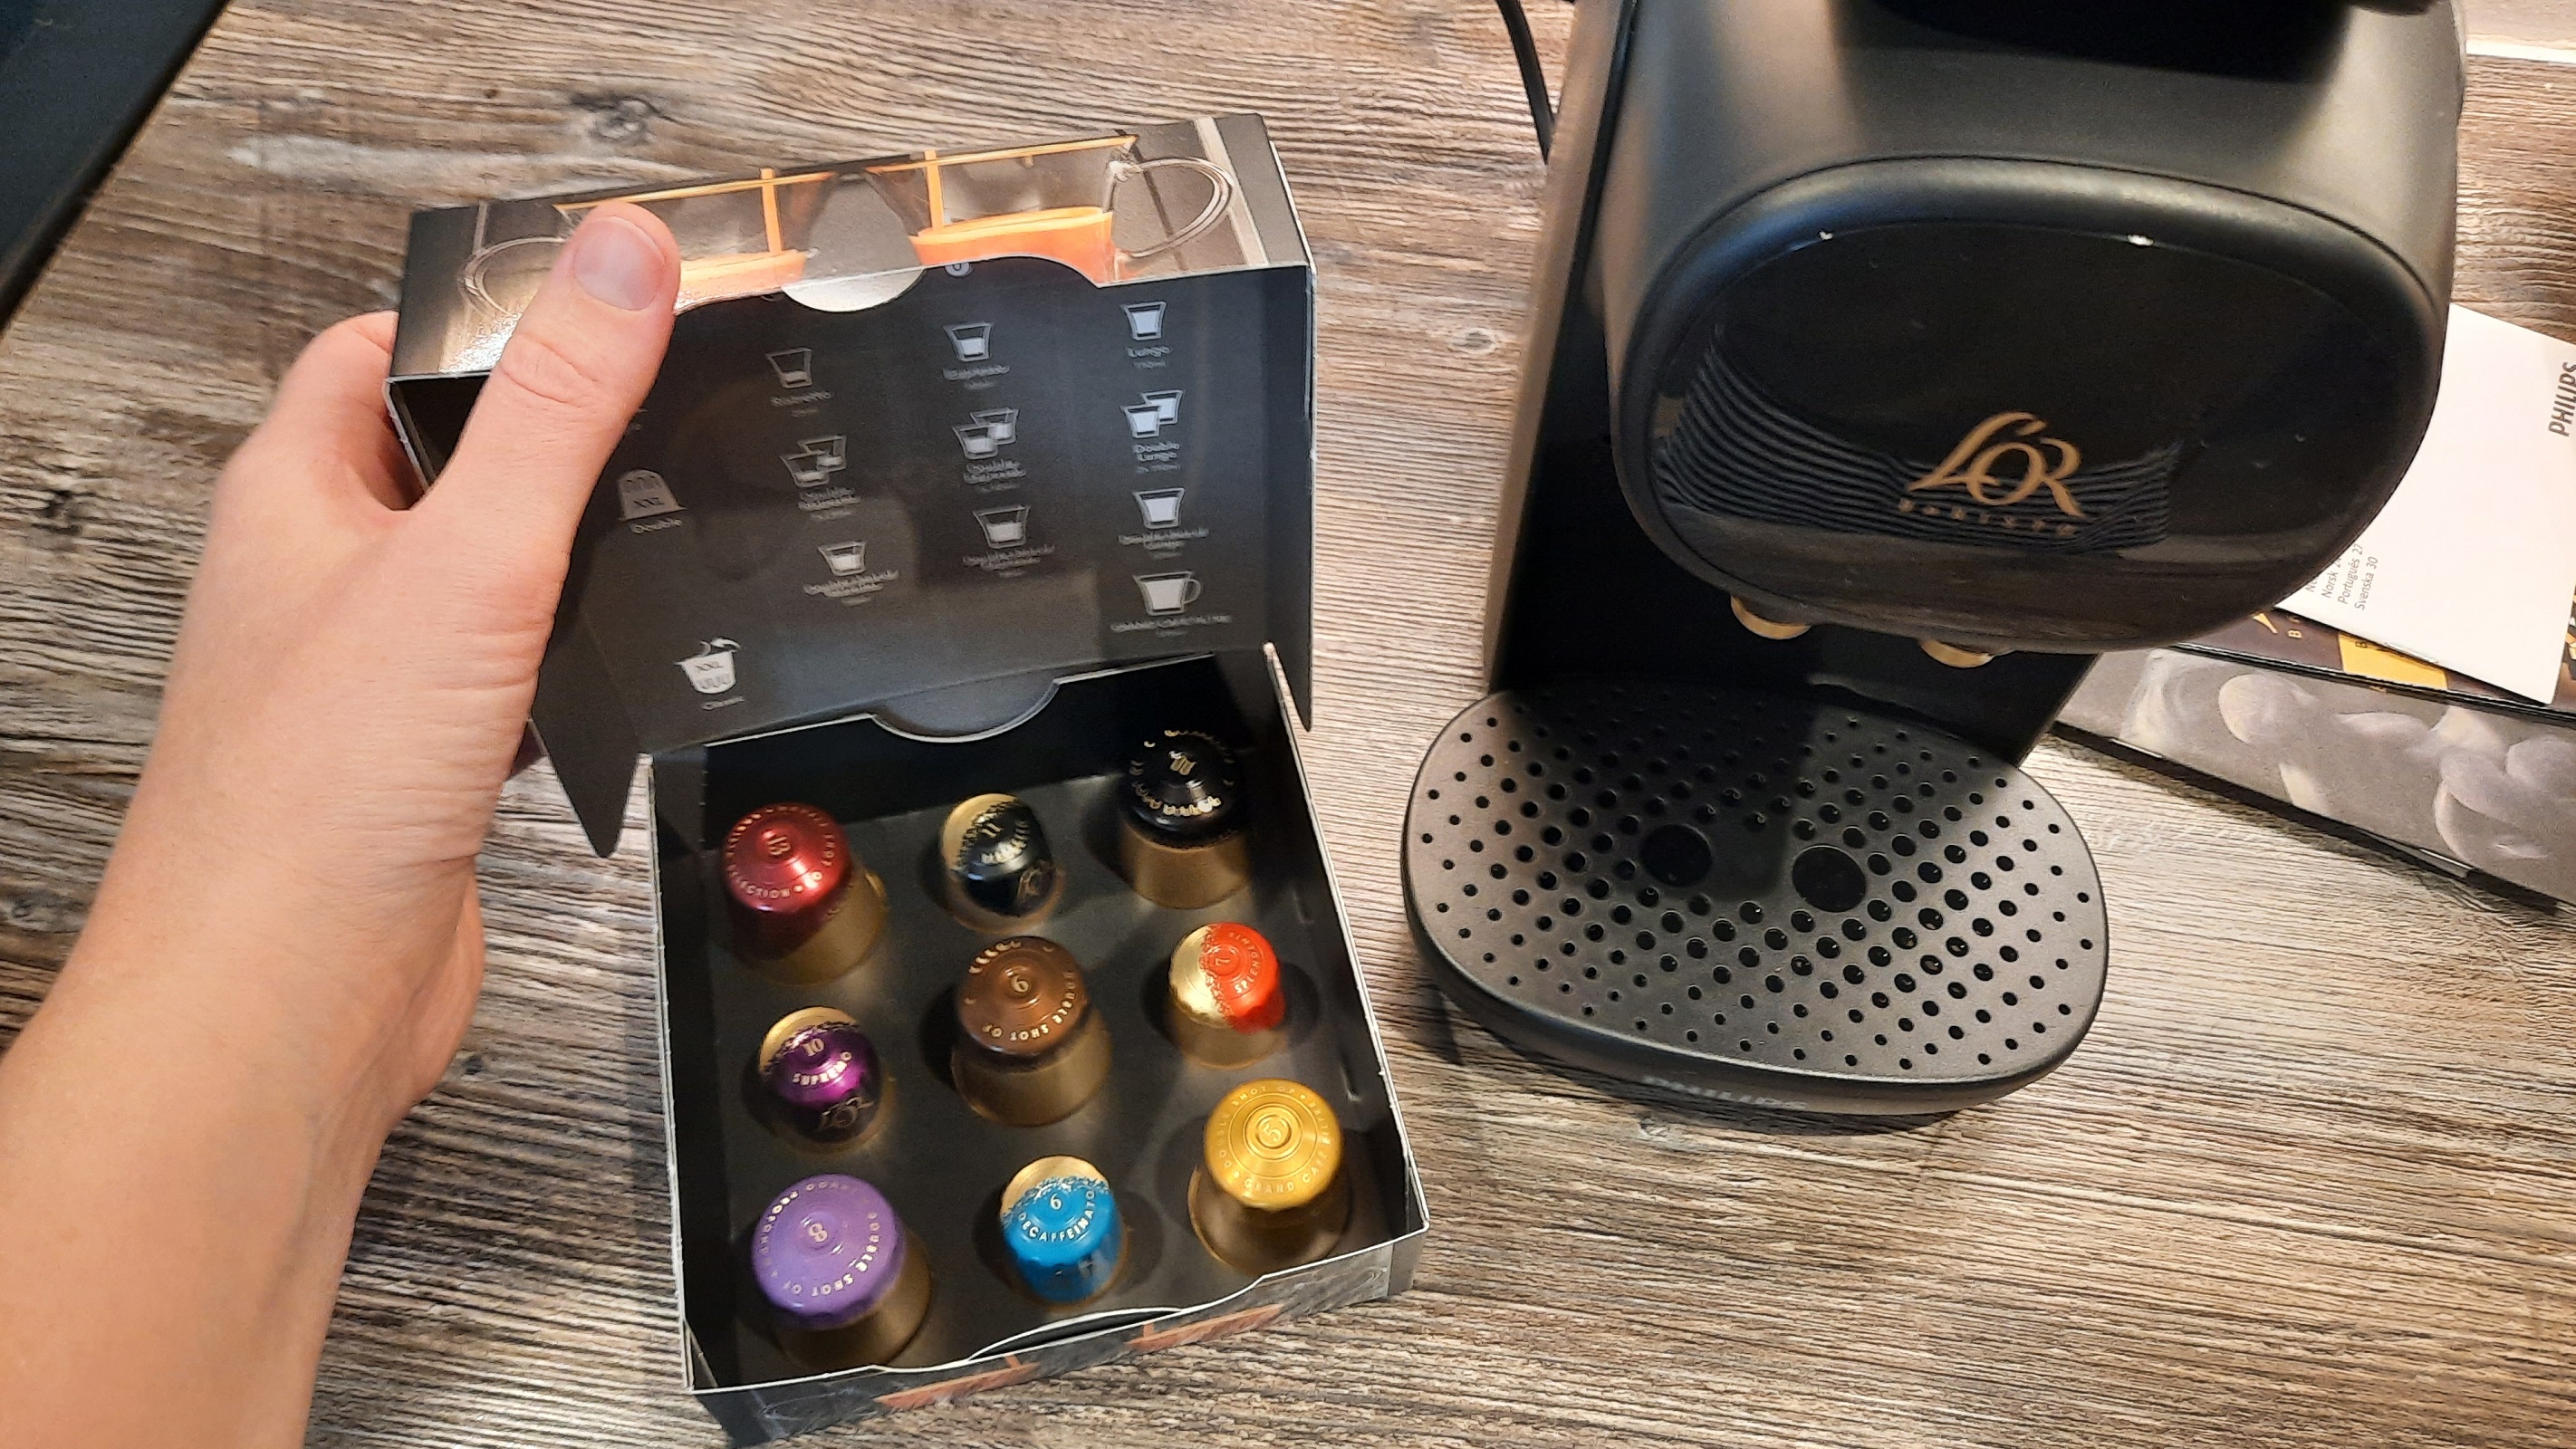 L'OR Barista Sublime coffee machine with sample capsules